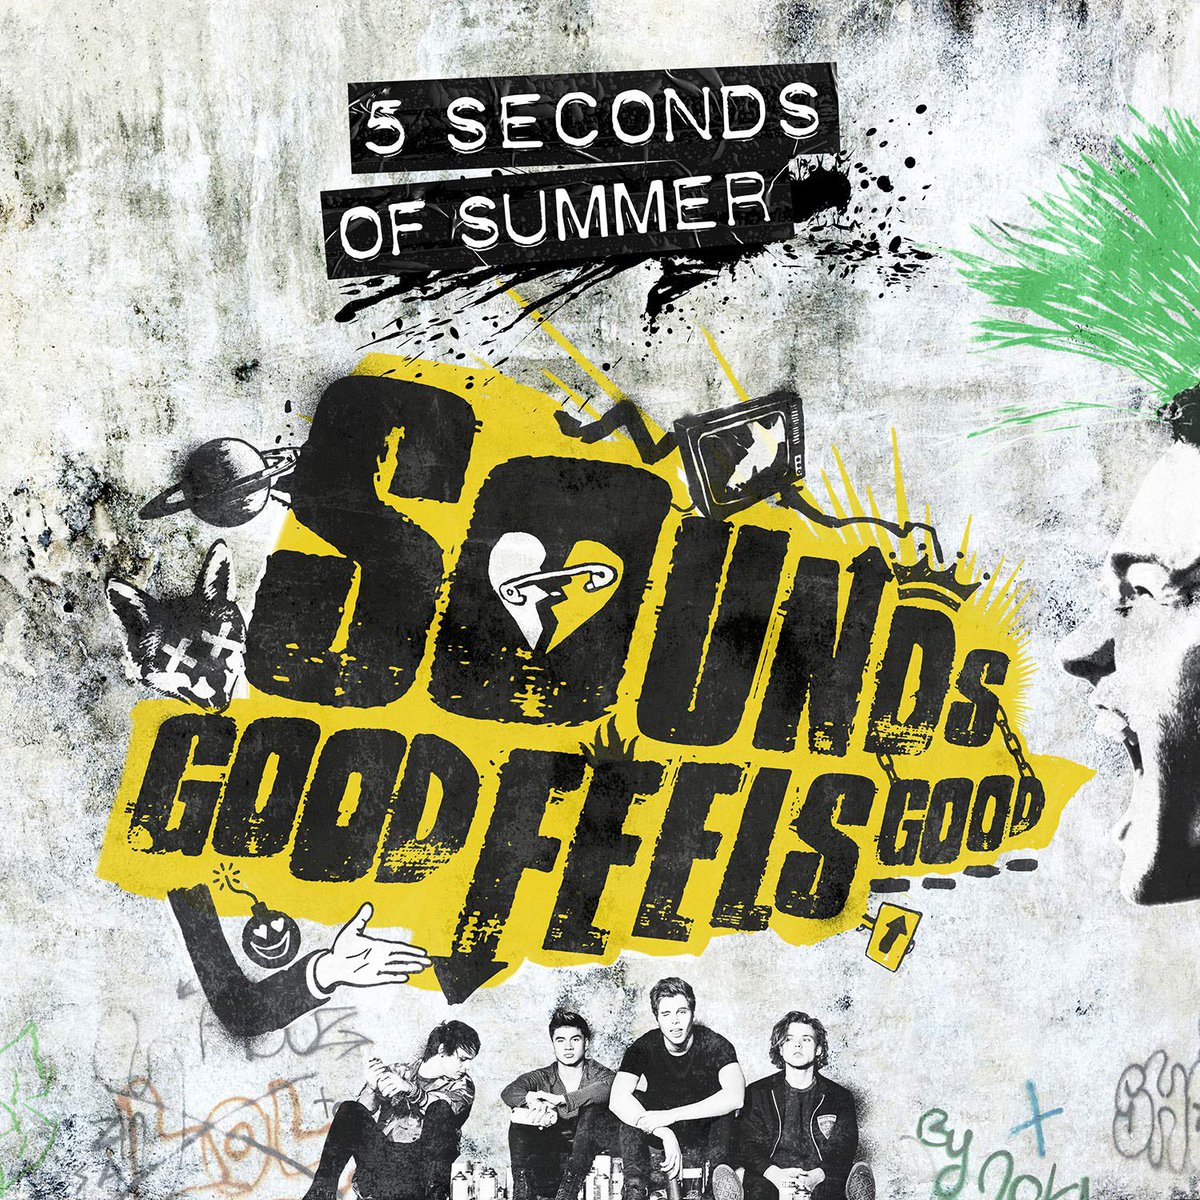 𝚘𝚞𝚝𝚎𝚛 𝚜𝚙𝚊𝚌𝚎 / 𝚌𝚊𝚛𝚛𝚢 𝚘𝚗5 seconds of summersounds good feels good (2015)